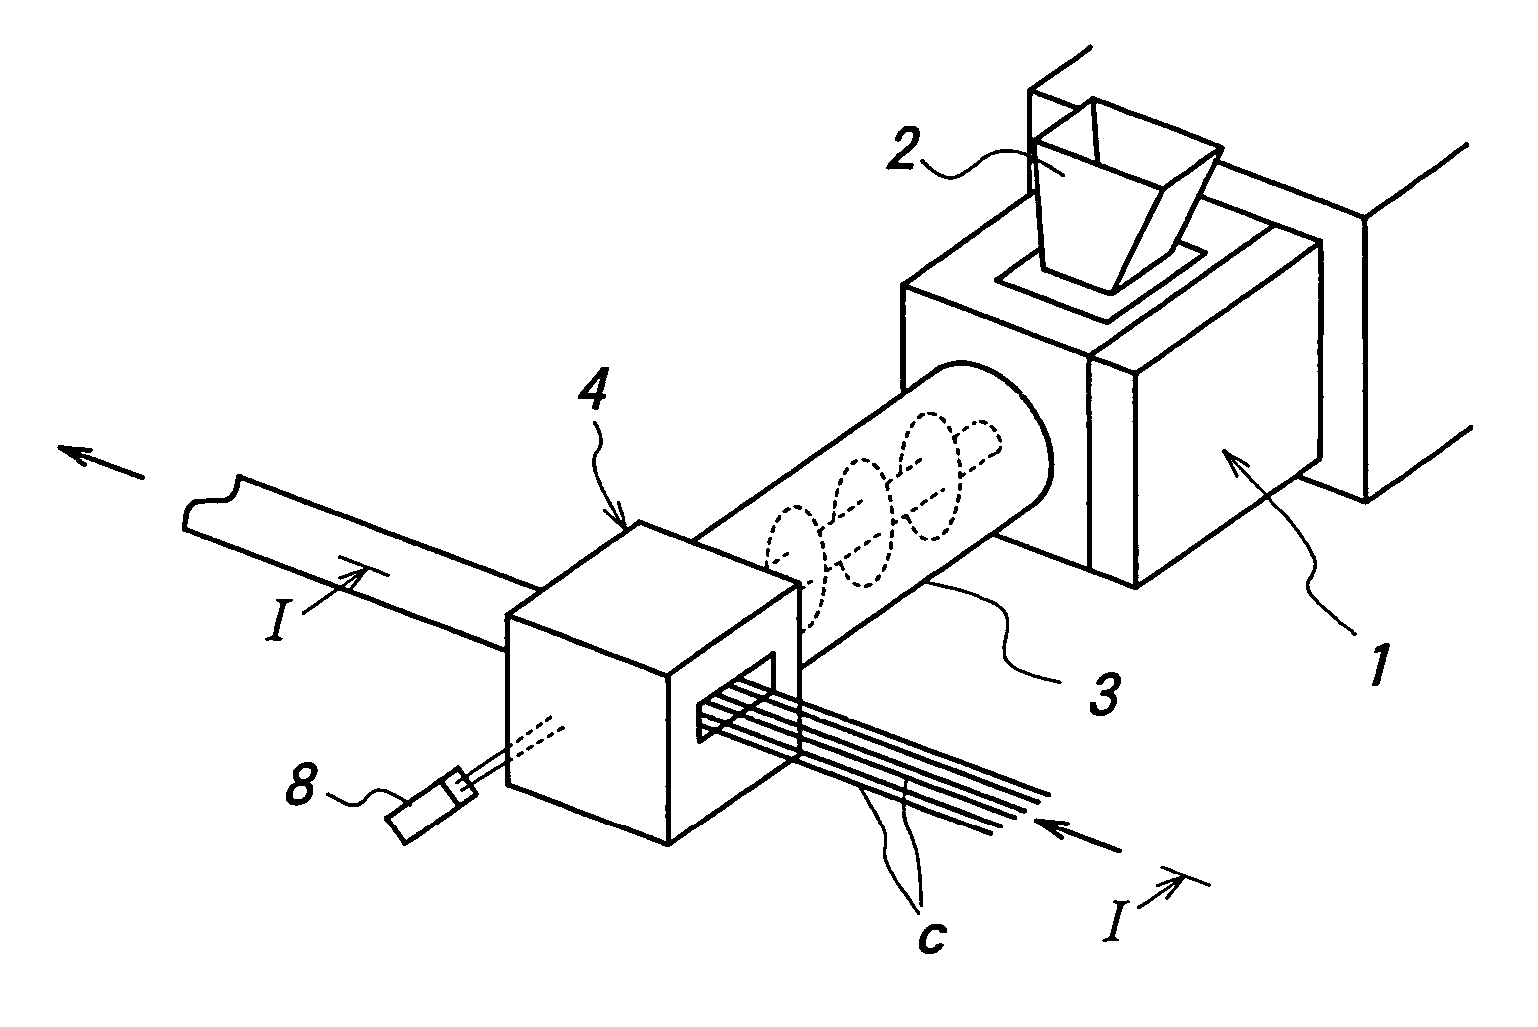 Apparatus for coating belt cord with rubber